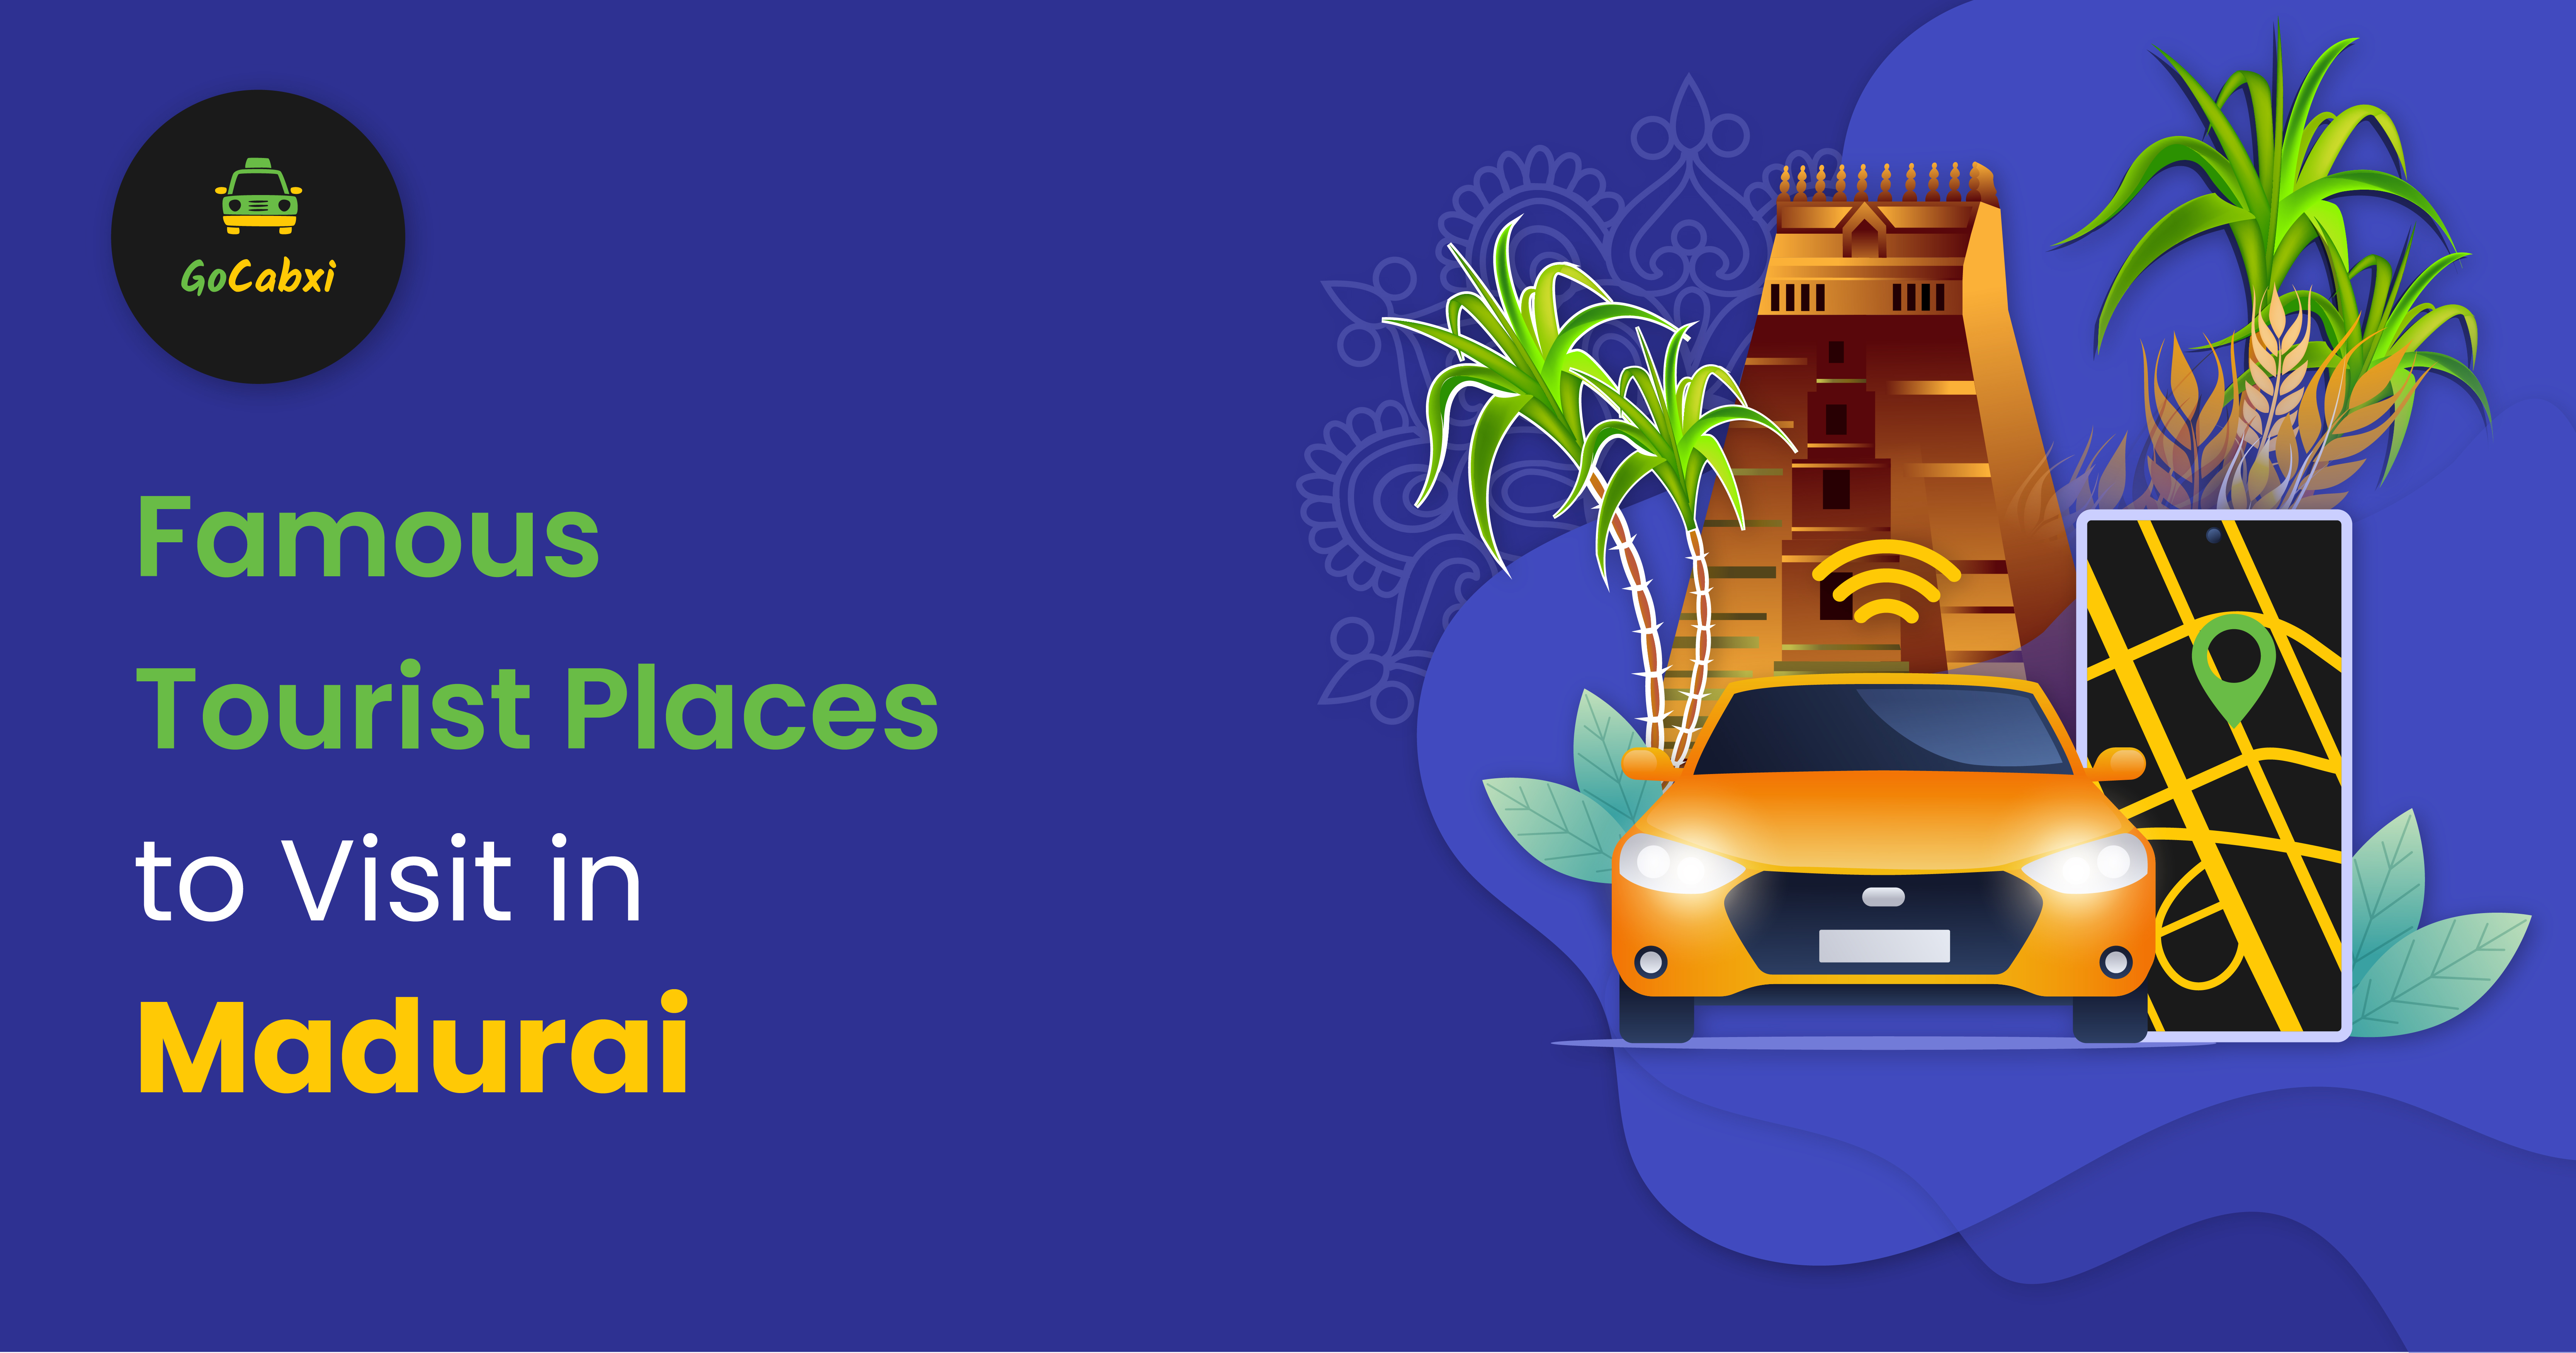 The Famous tourist places to visit in Madurai